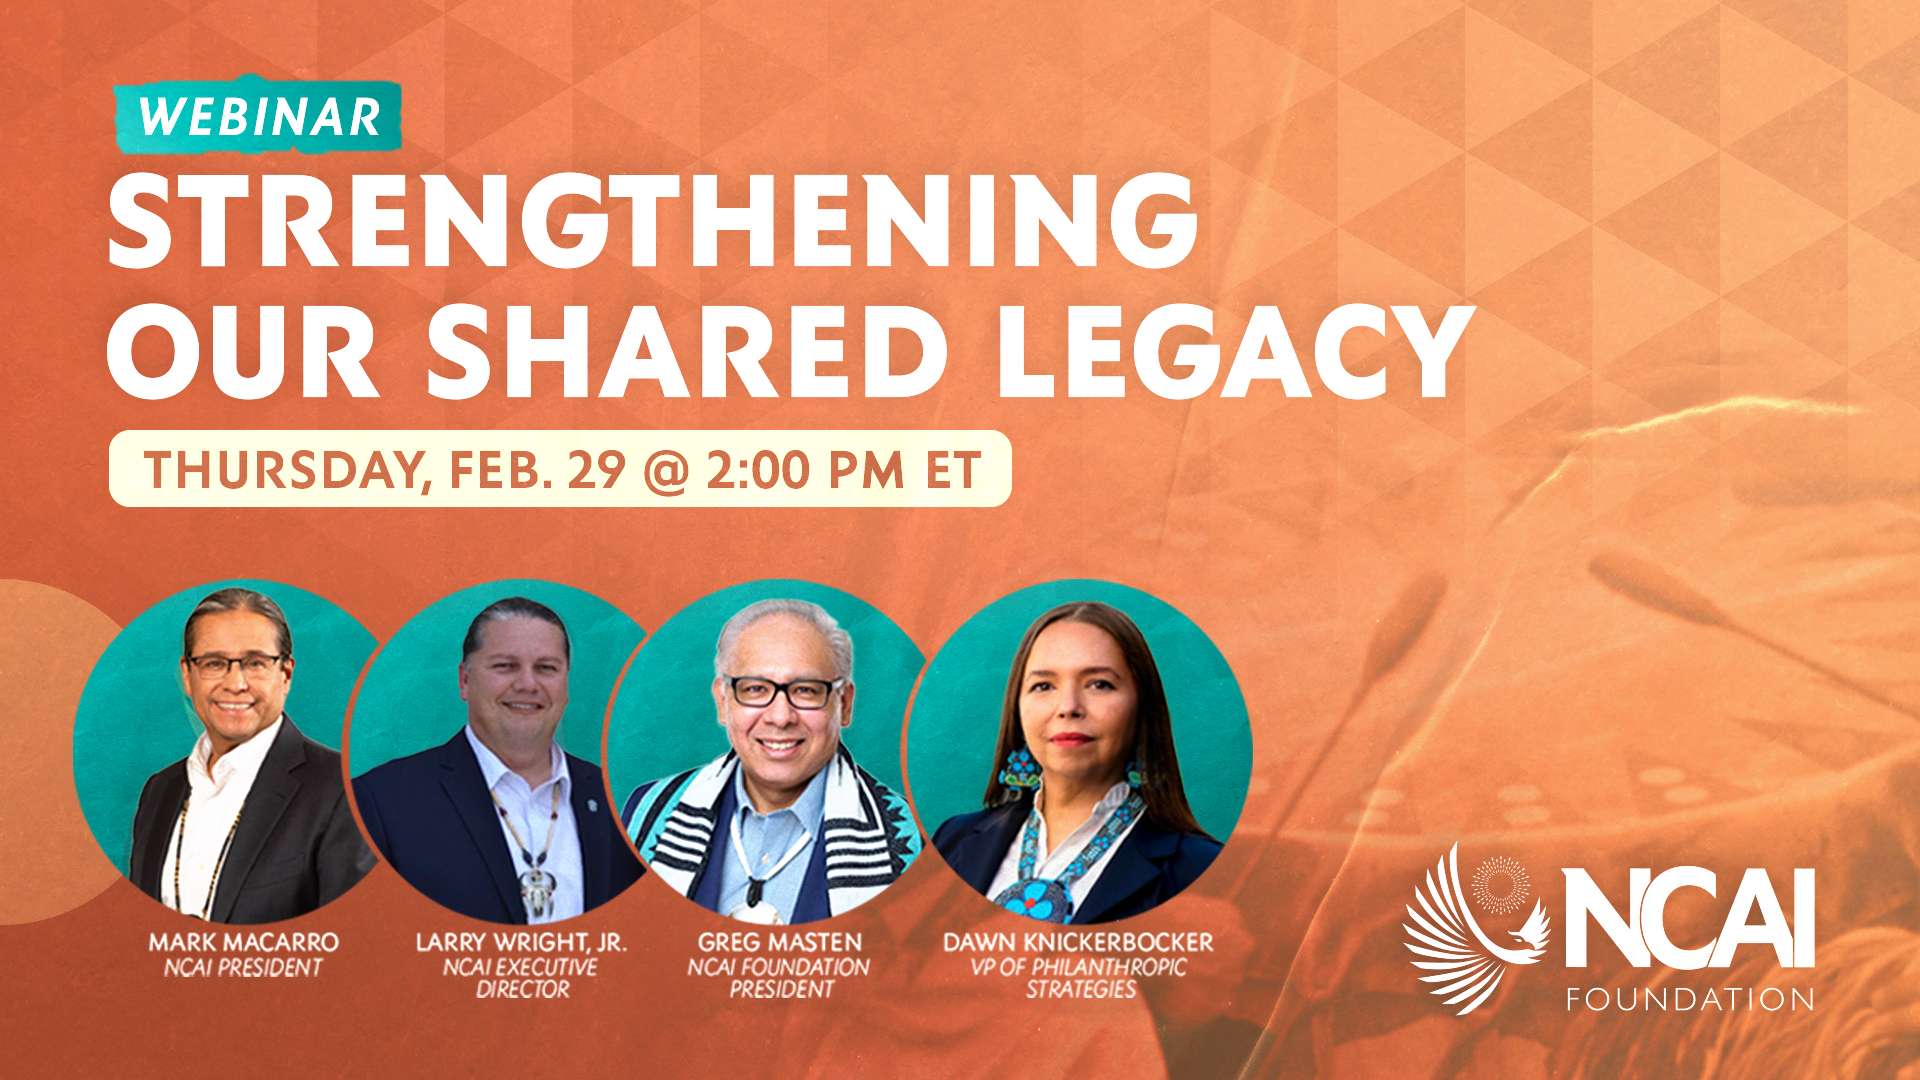 NCAI Foundation: Strengthening Our Shared Legacy